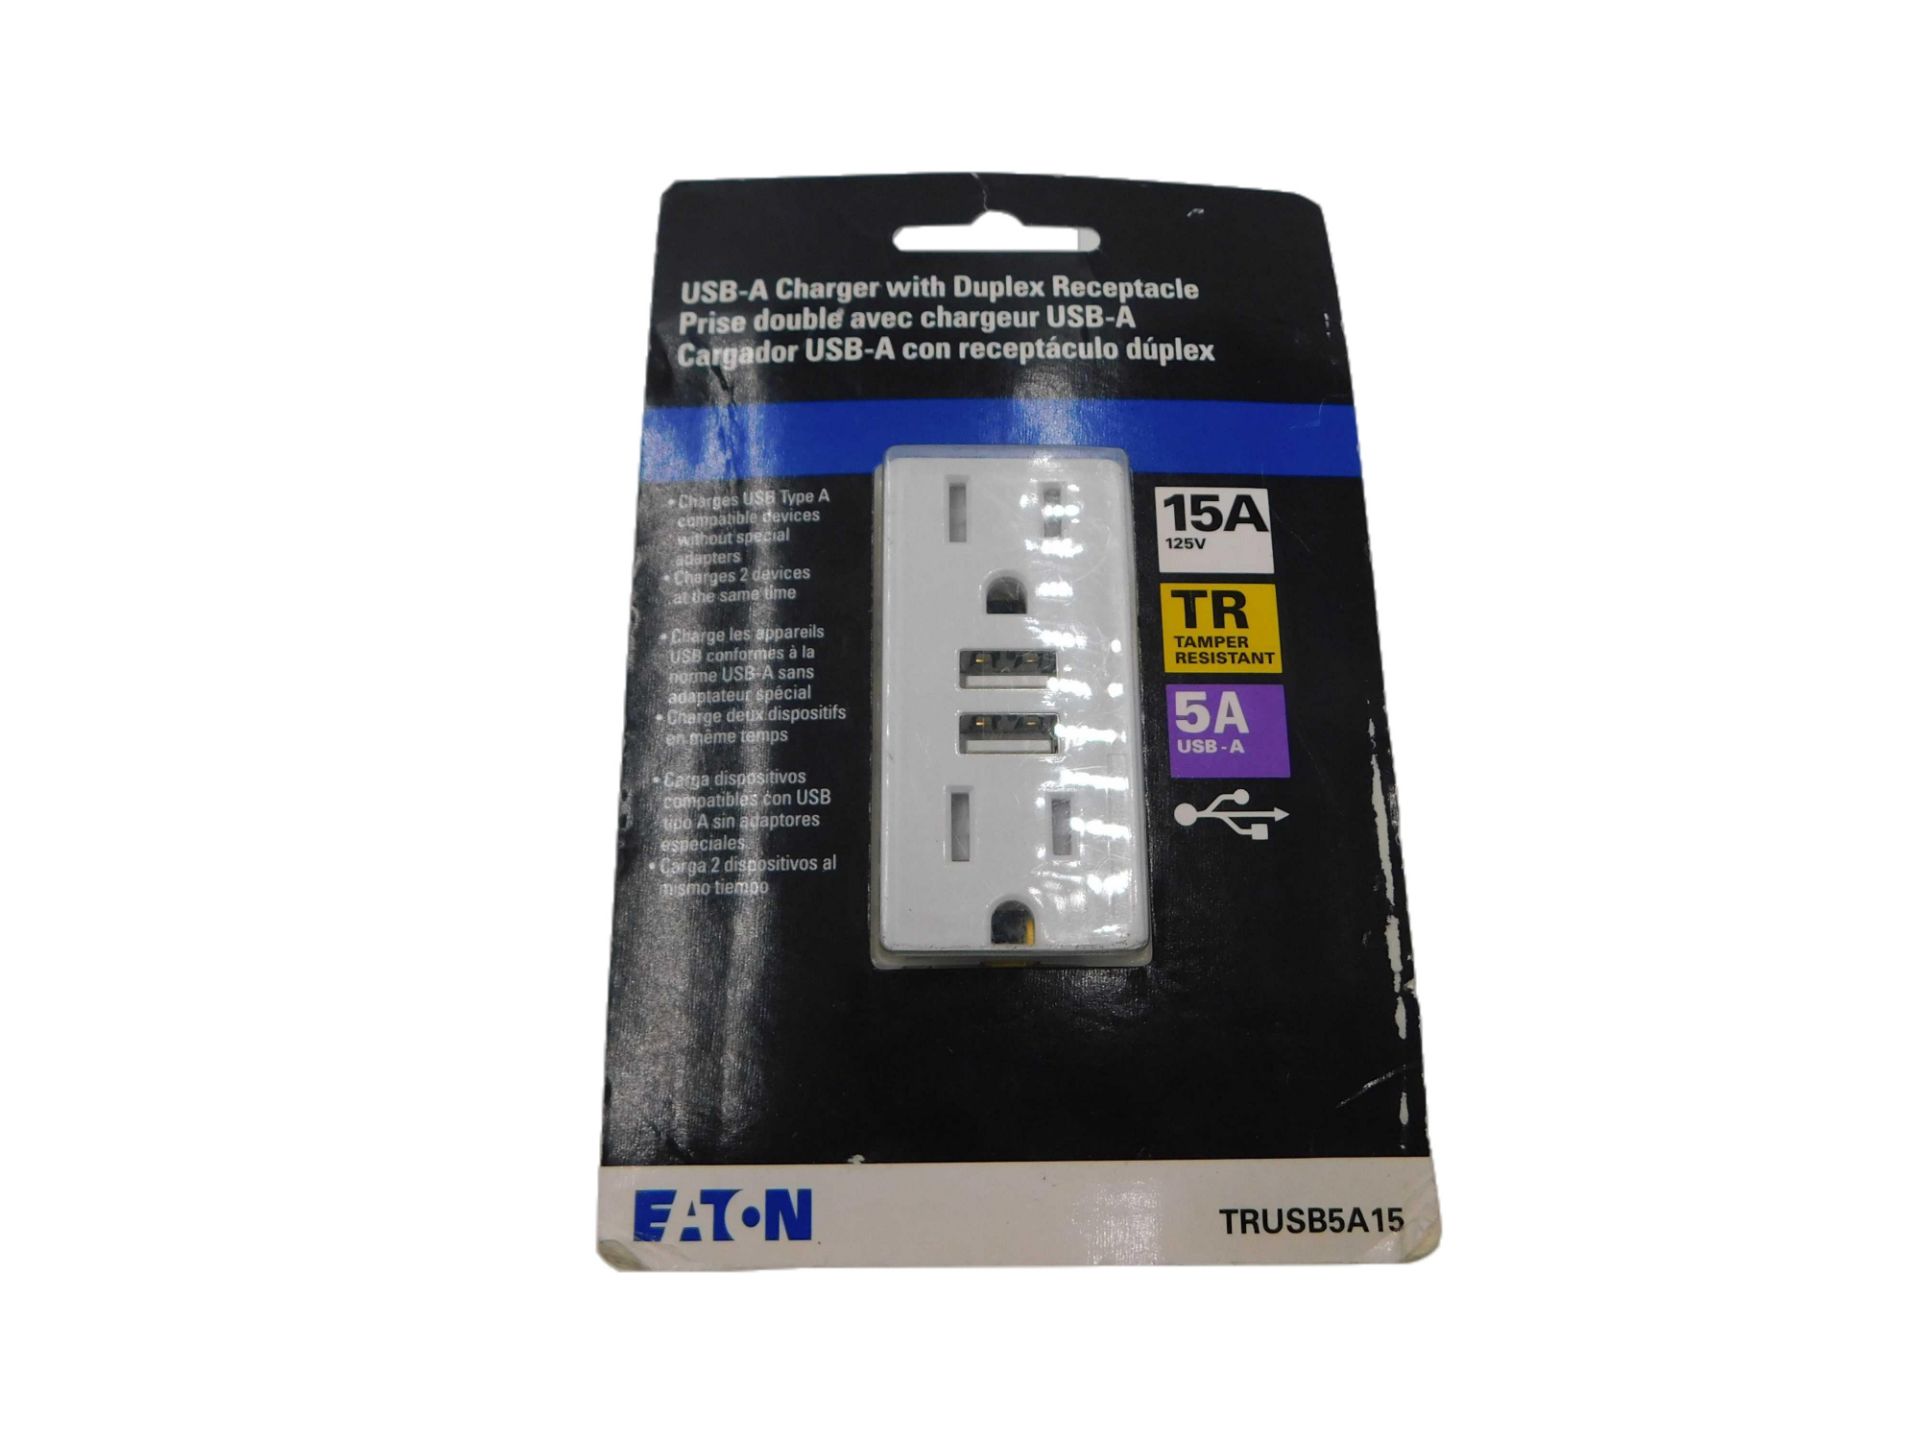 42x Eaton TRUSB5A15W-KB-LW Outlets Combination USB Charger/Duplex Receptacle 15A 125V White EA Tampe